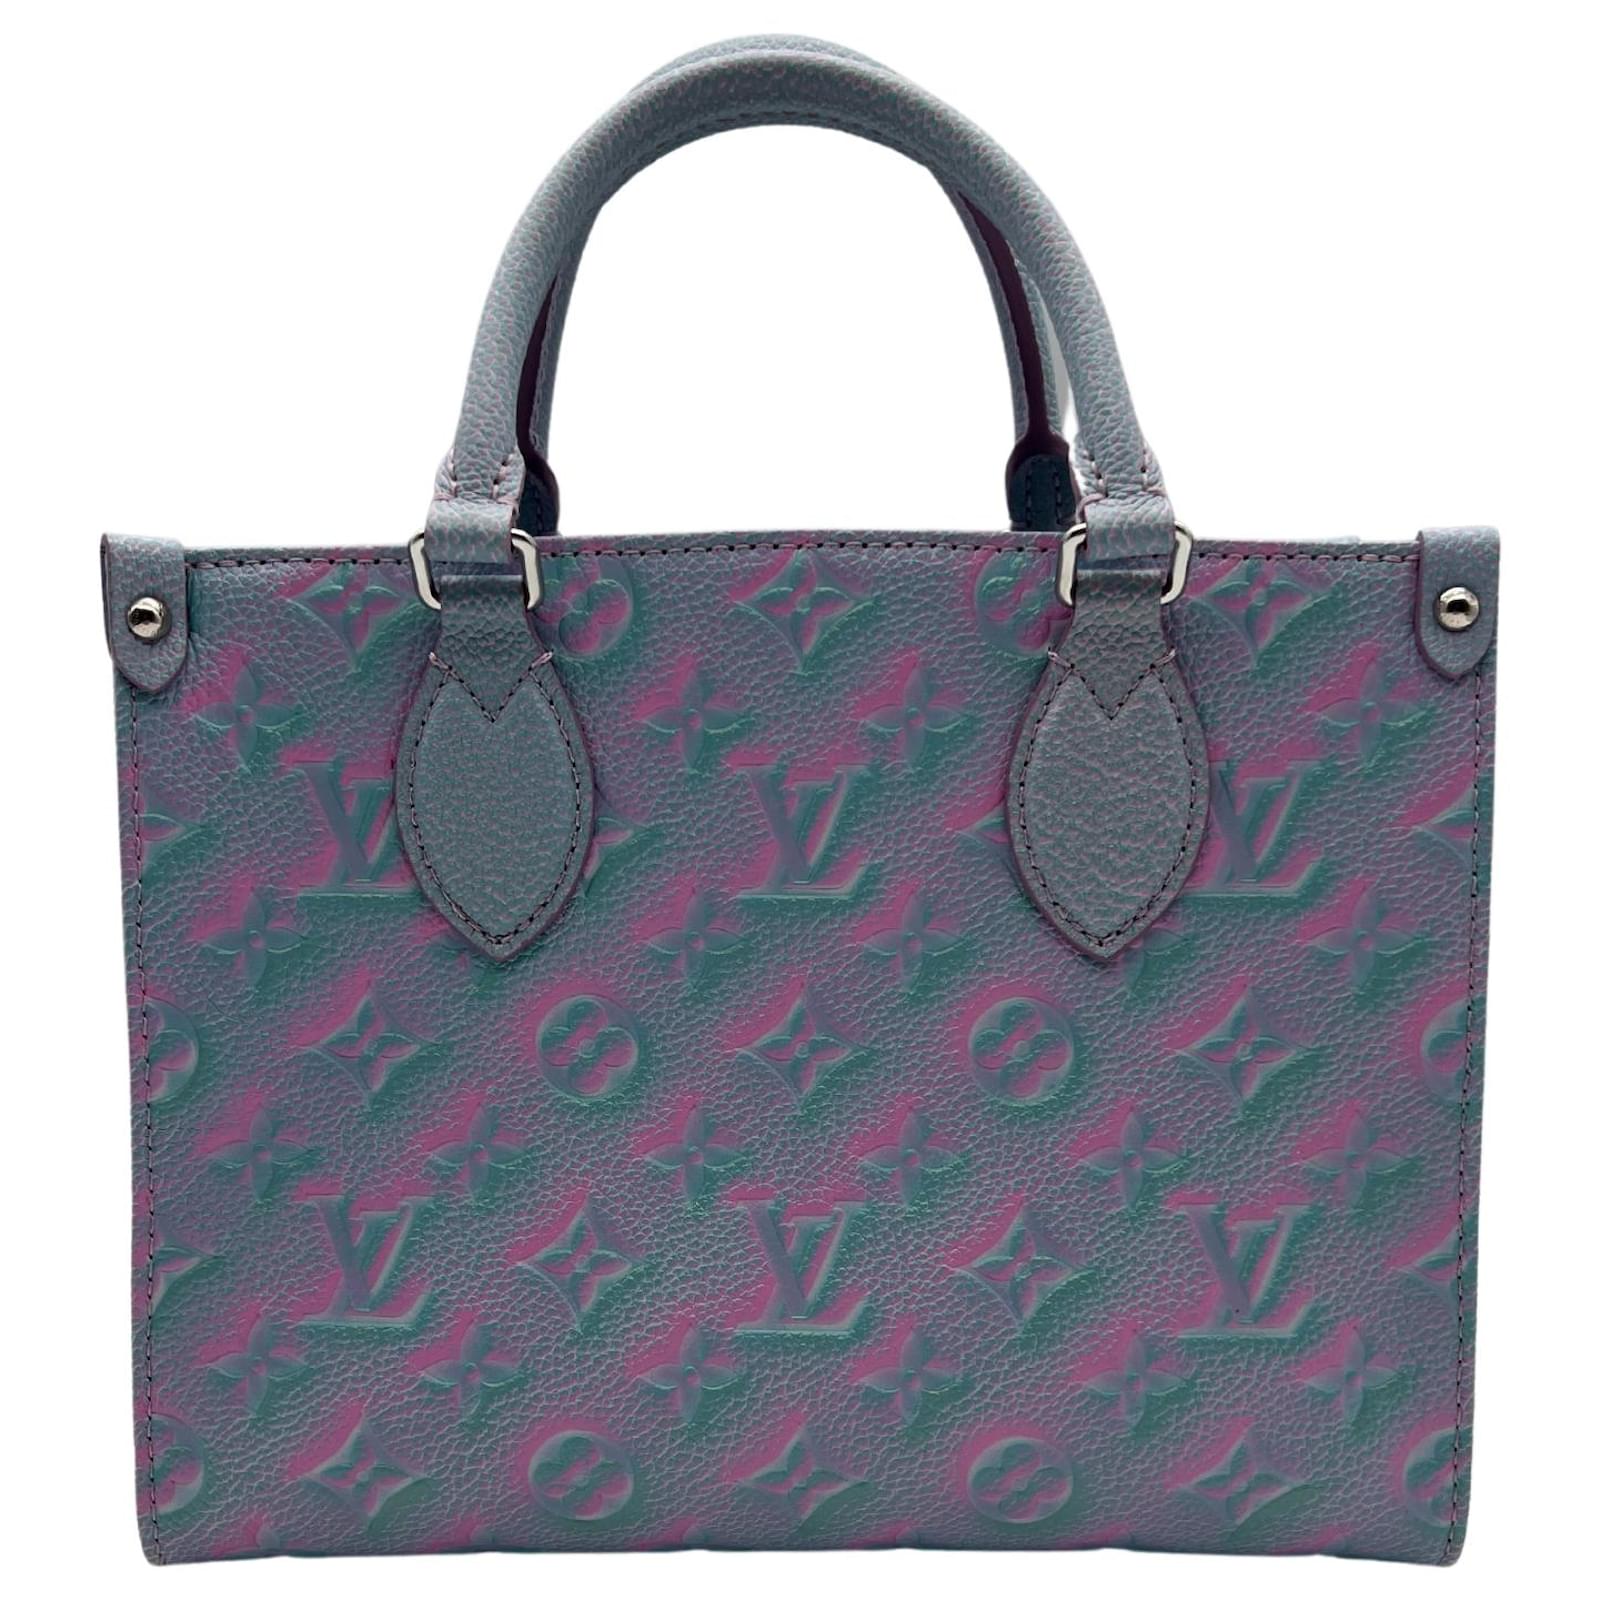 Louis Vuitton OnTheGo PM tote Stardust Lilas Purple Blue Sold Out Color